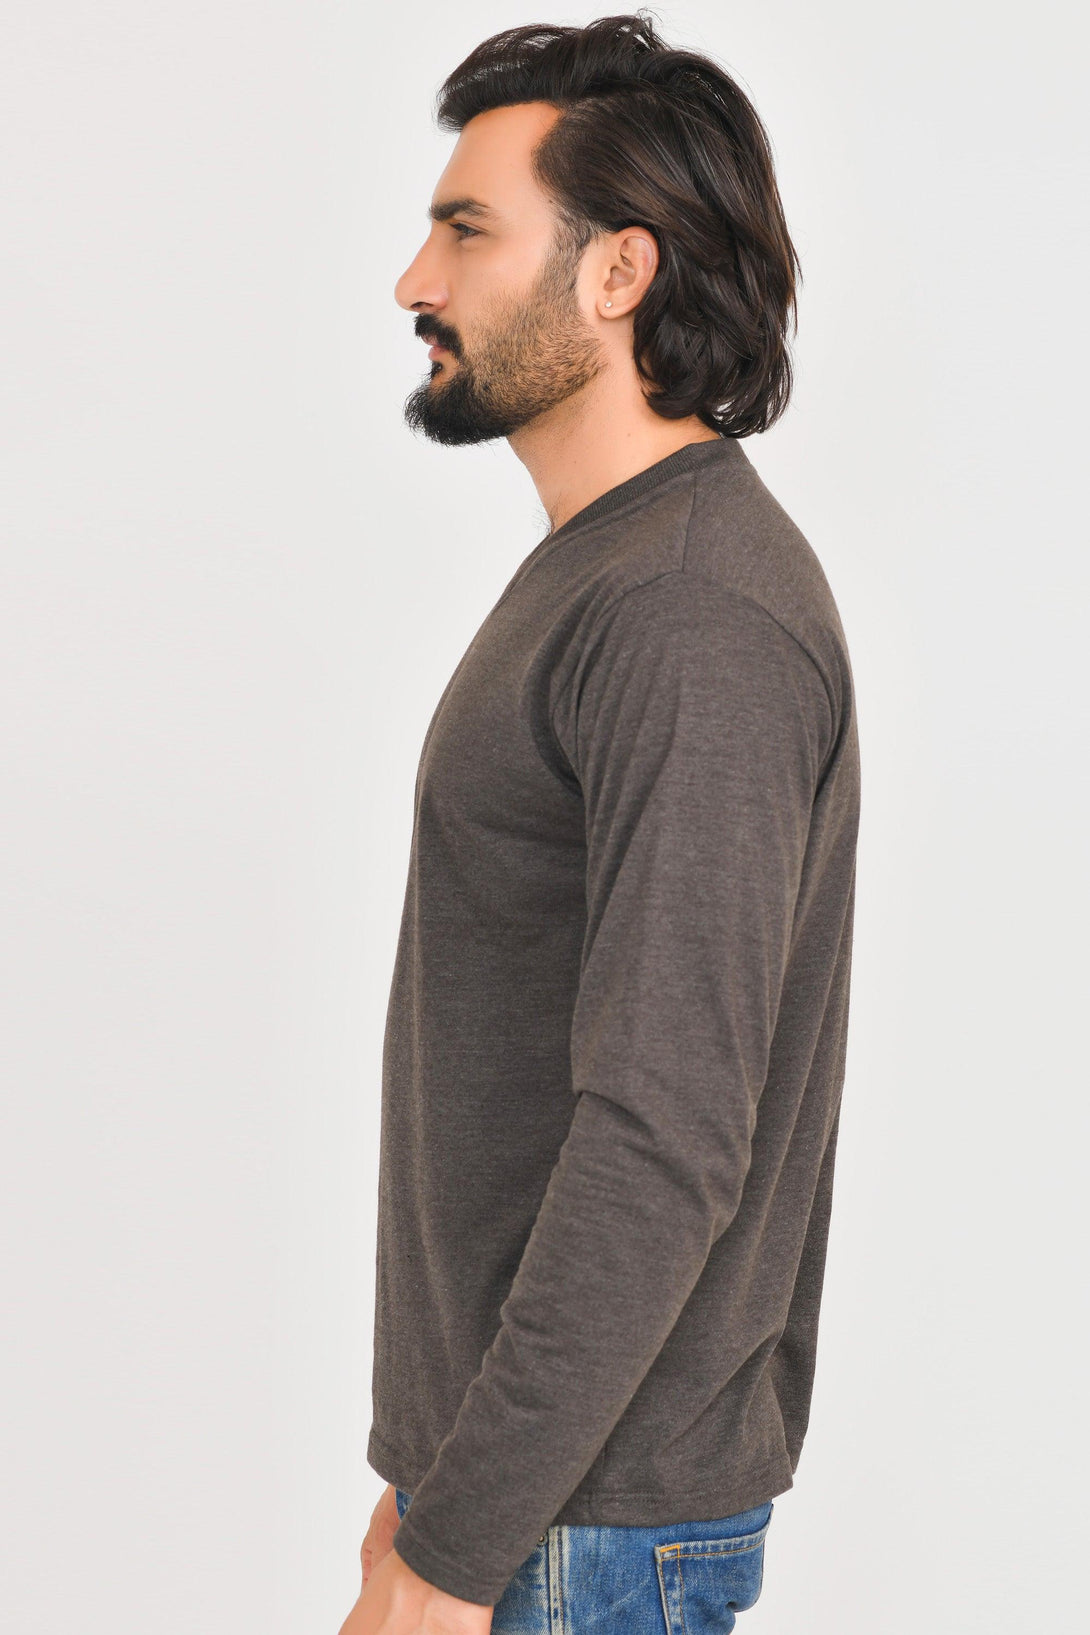 V-Neck Long Sleeve T-Shirts | CHARCOAL - Pack of 4 - FTS